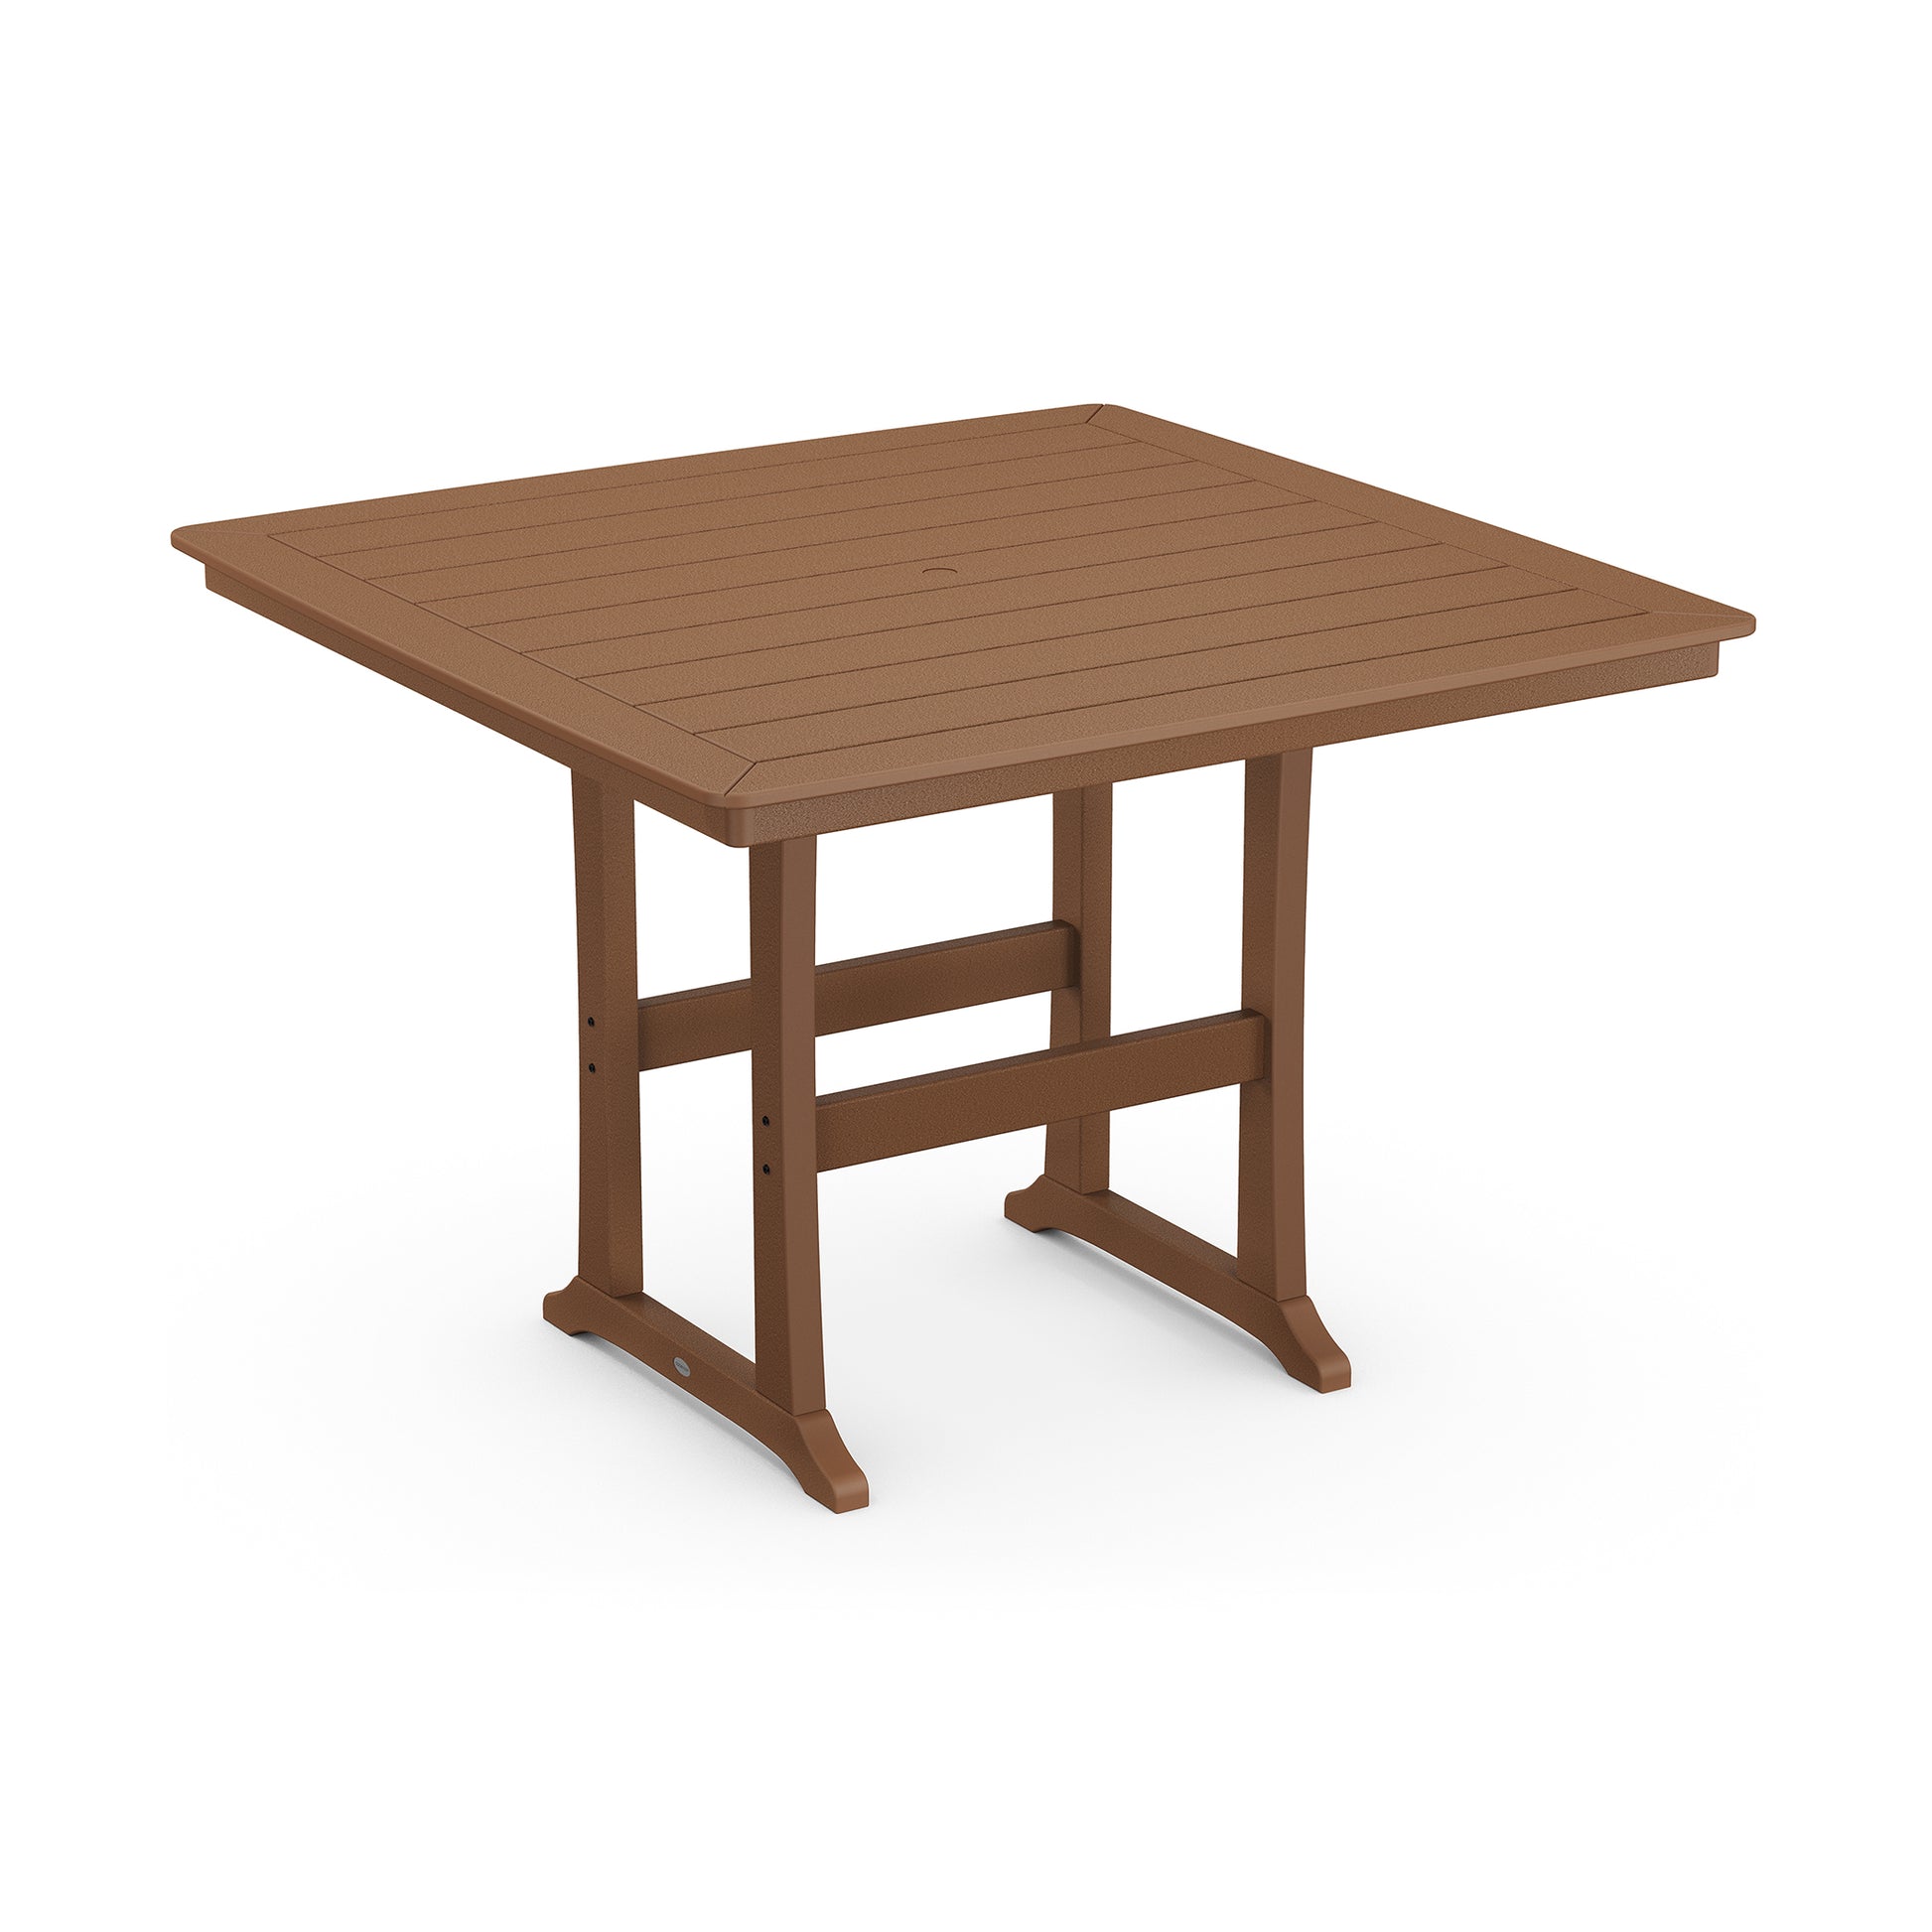 An ultra-durable POLYWOOD Nautical Trestle 59" Bar Table made of synthetic wood, featuring a simple, sturdy design with four solid legs and slatted top, shown on a plain white background.